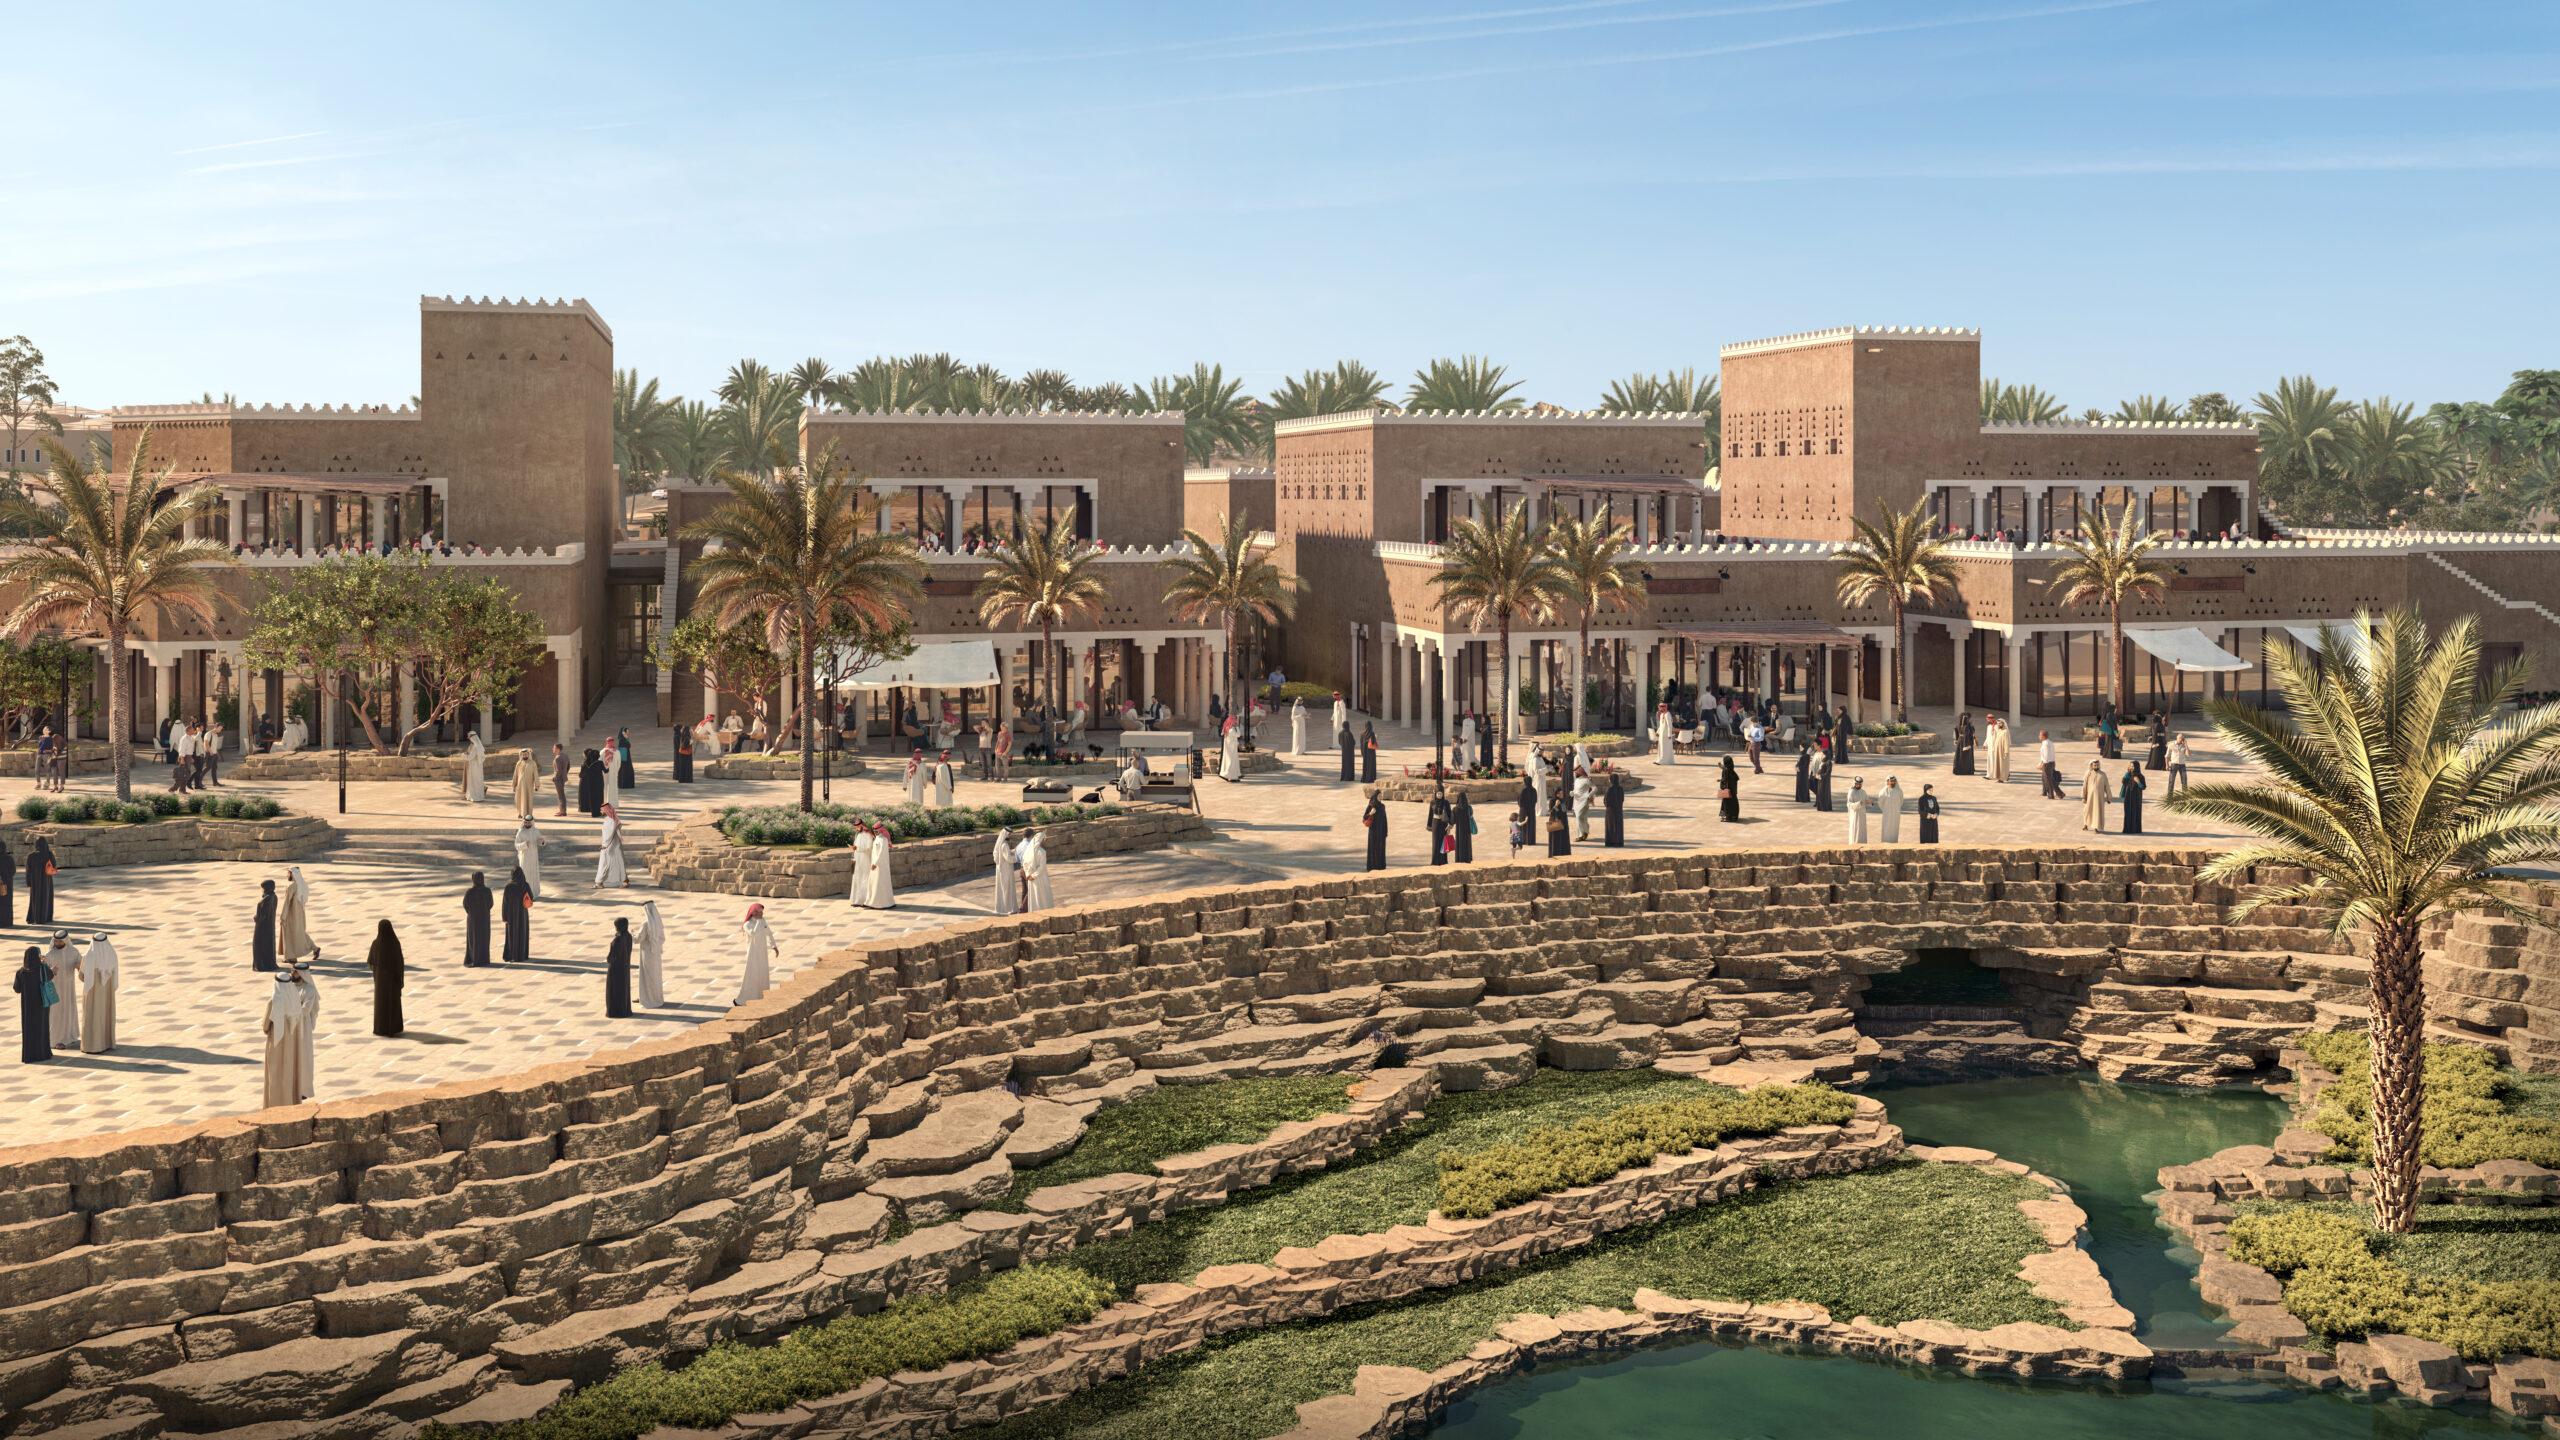 How to get a free pass to Saudi Arabia's Diriyah this summer